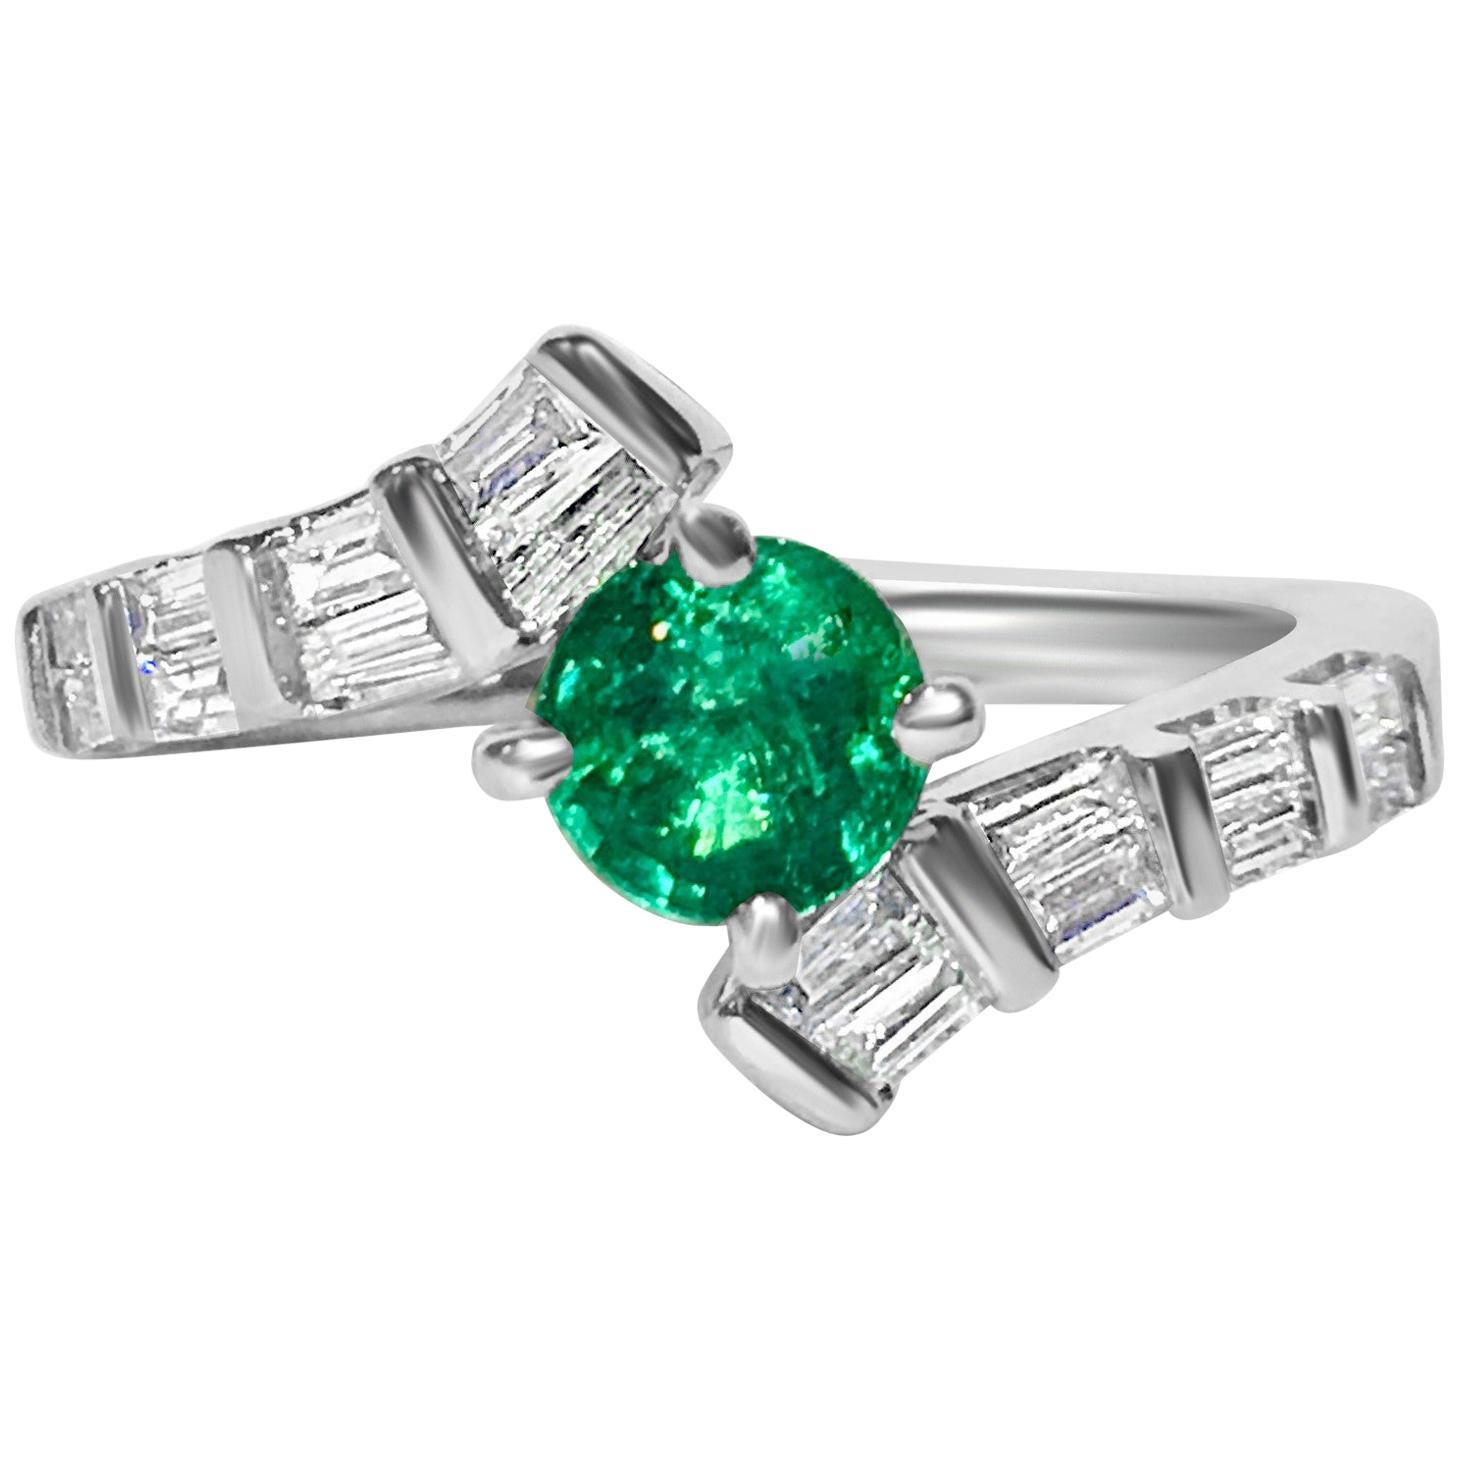 1.70 Carat Colombian Emerald Diamond Cocktail Engagement Ring For Sale